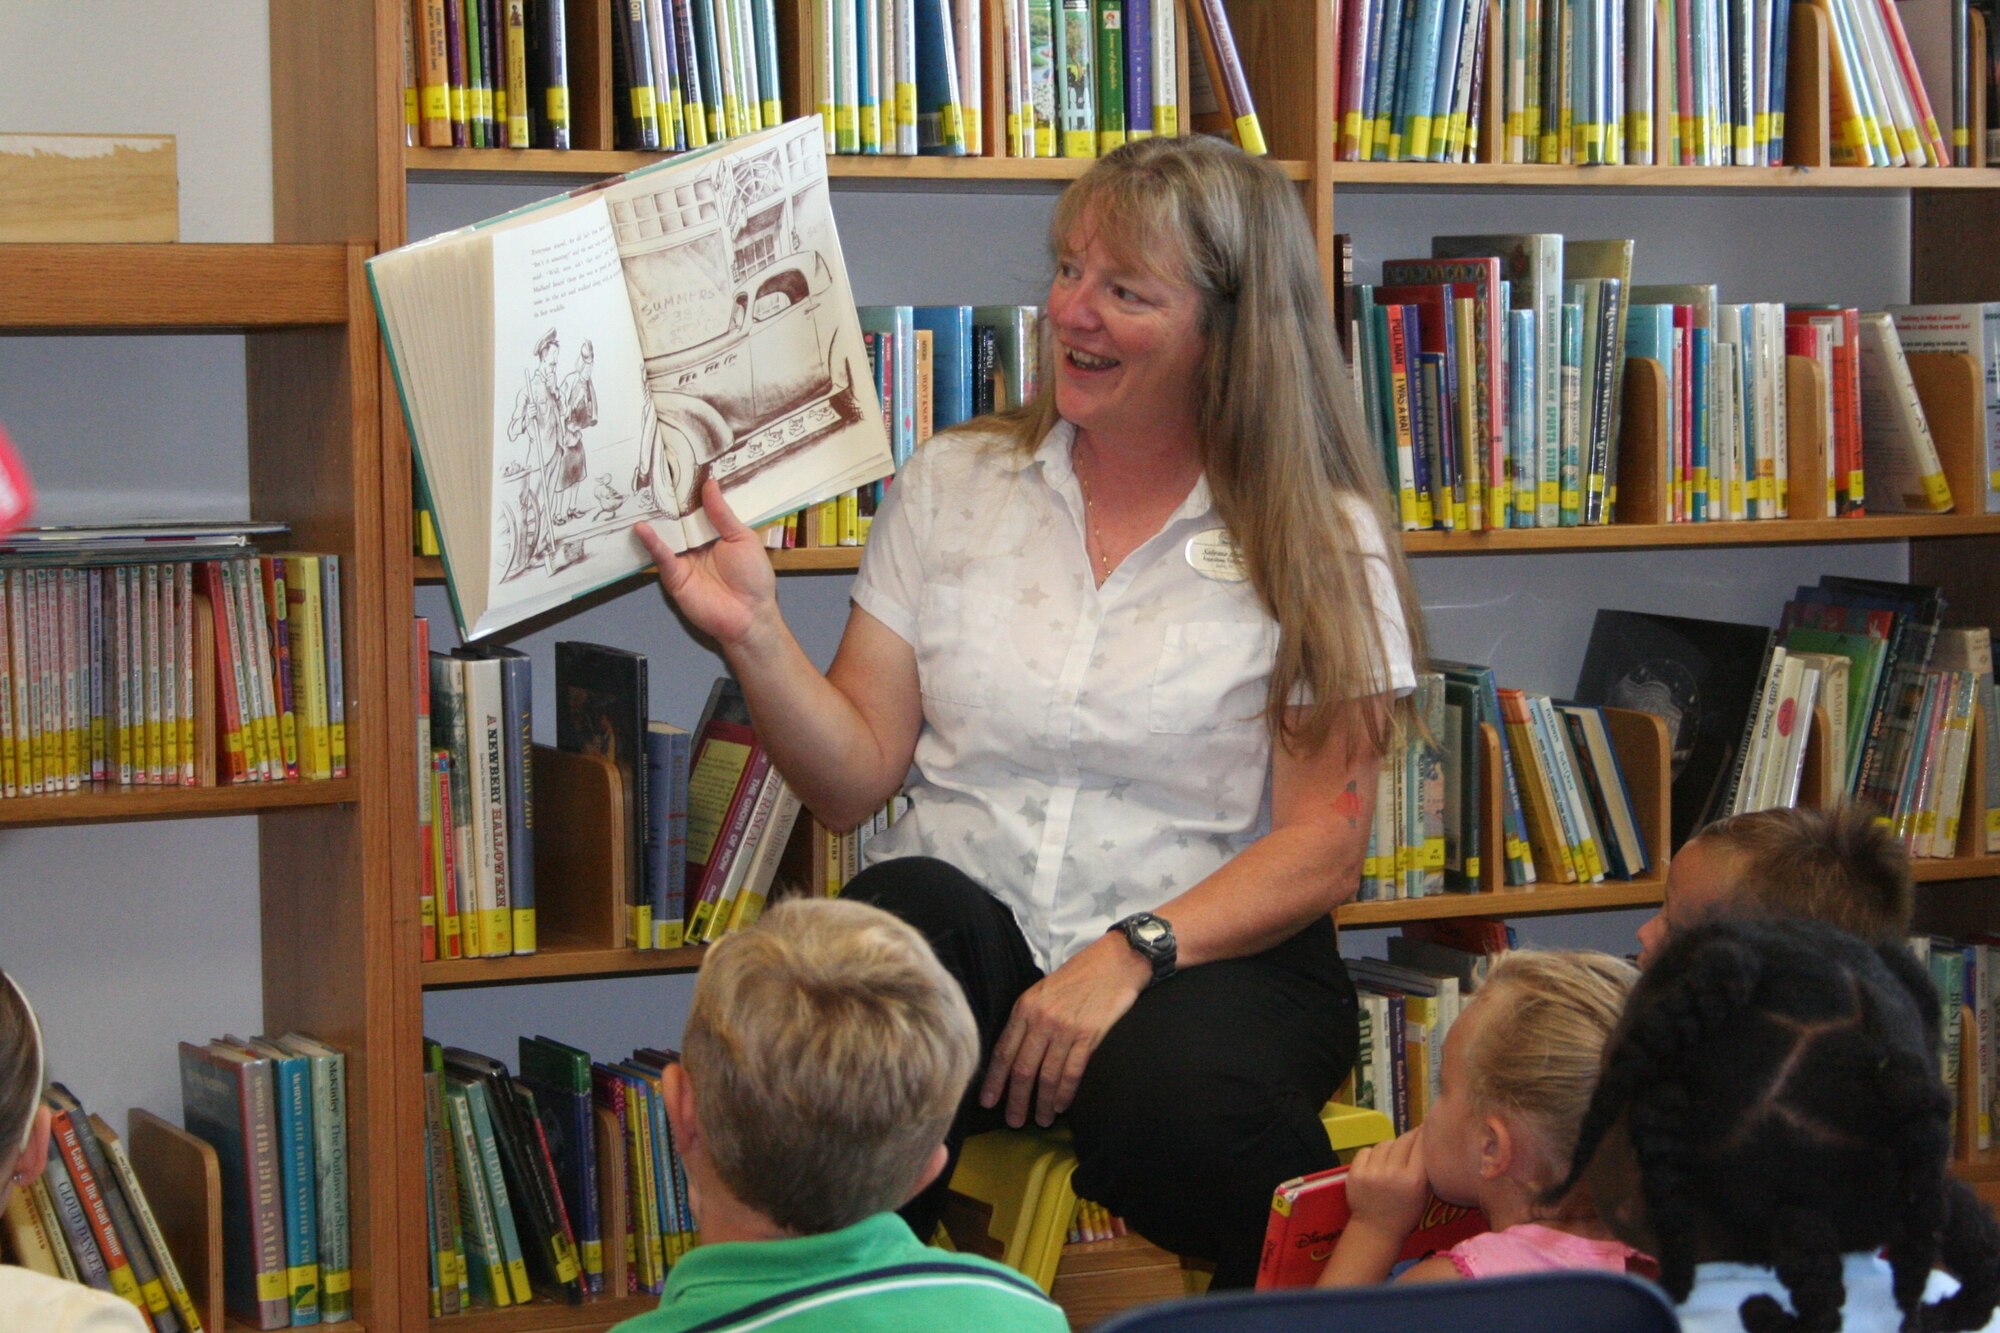 Sabrina Honda (center), the base library's program coordinator, reads a book to children as part of the library's summer reading hour.